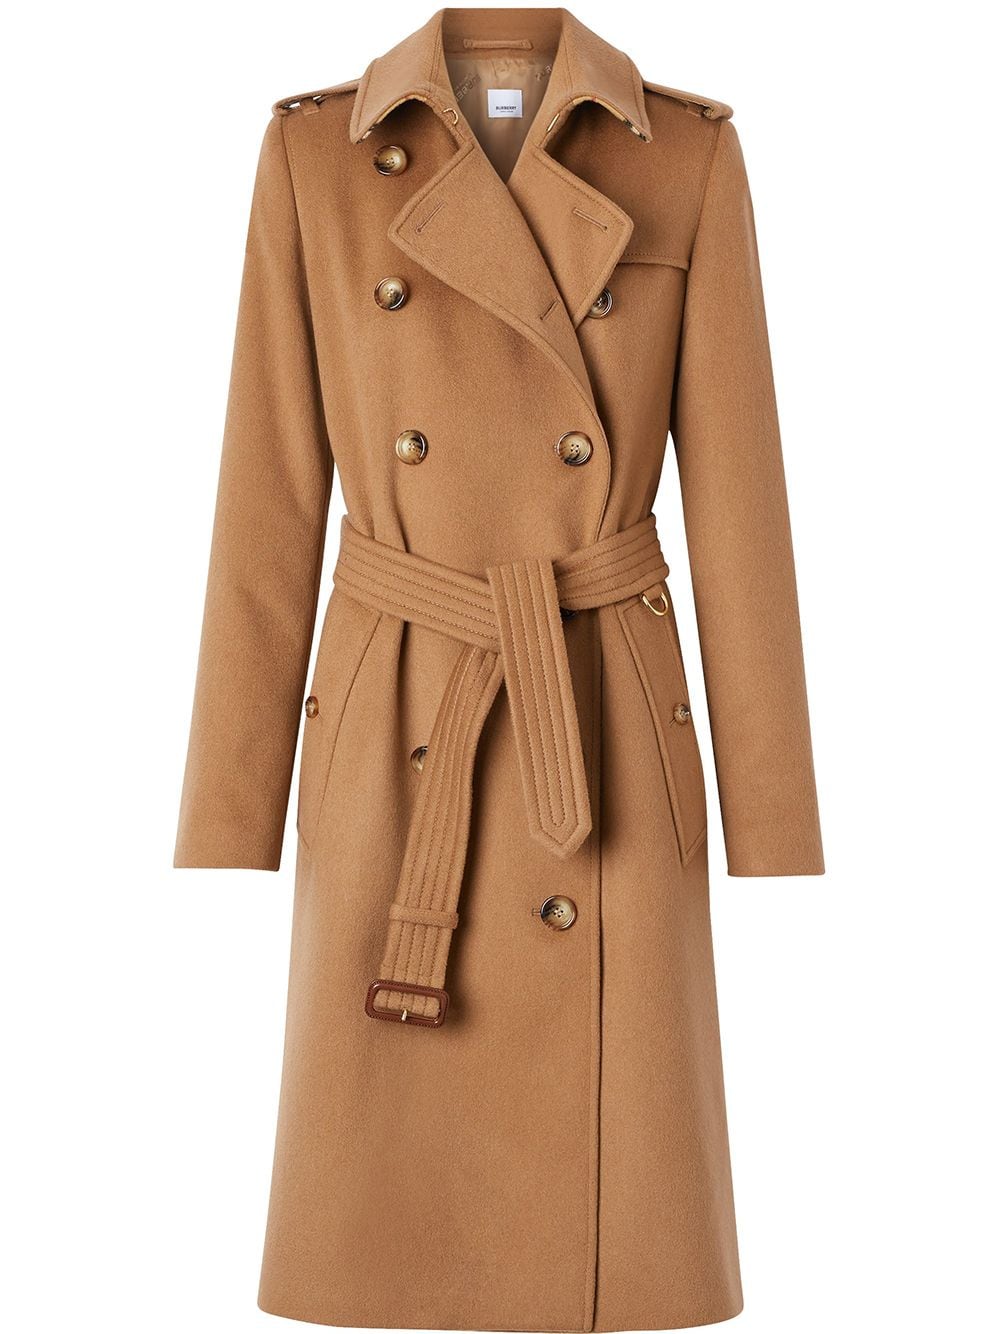 Shop Burberry with Afterpay - FARFETCH Australia